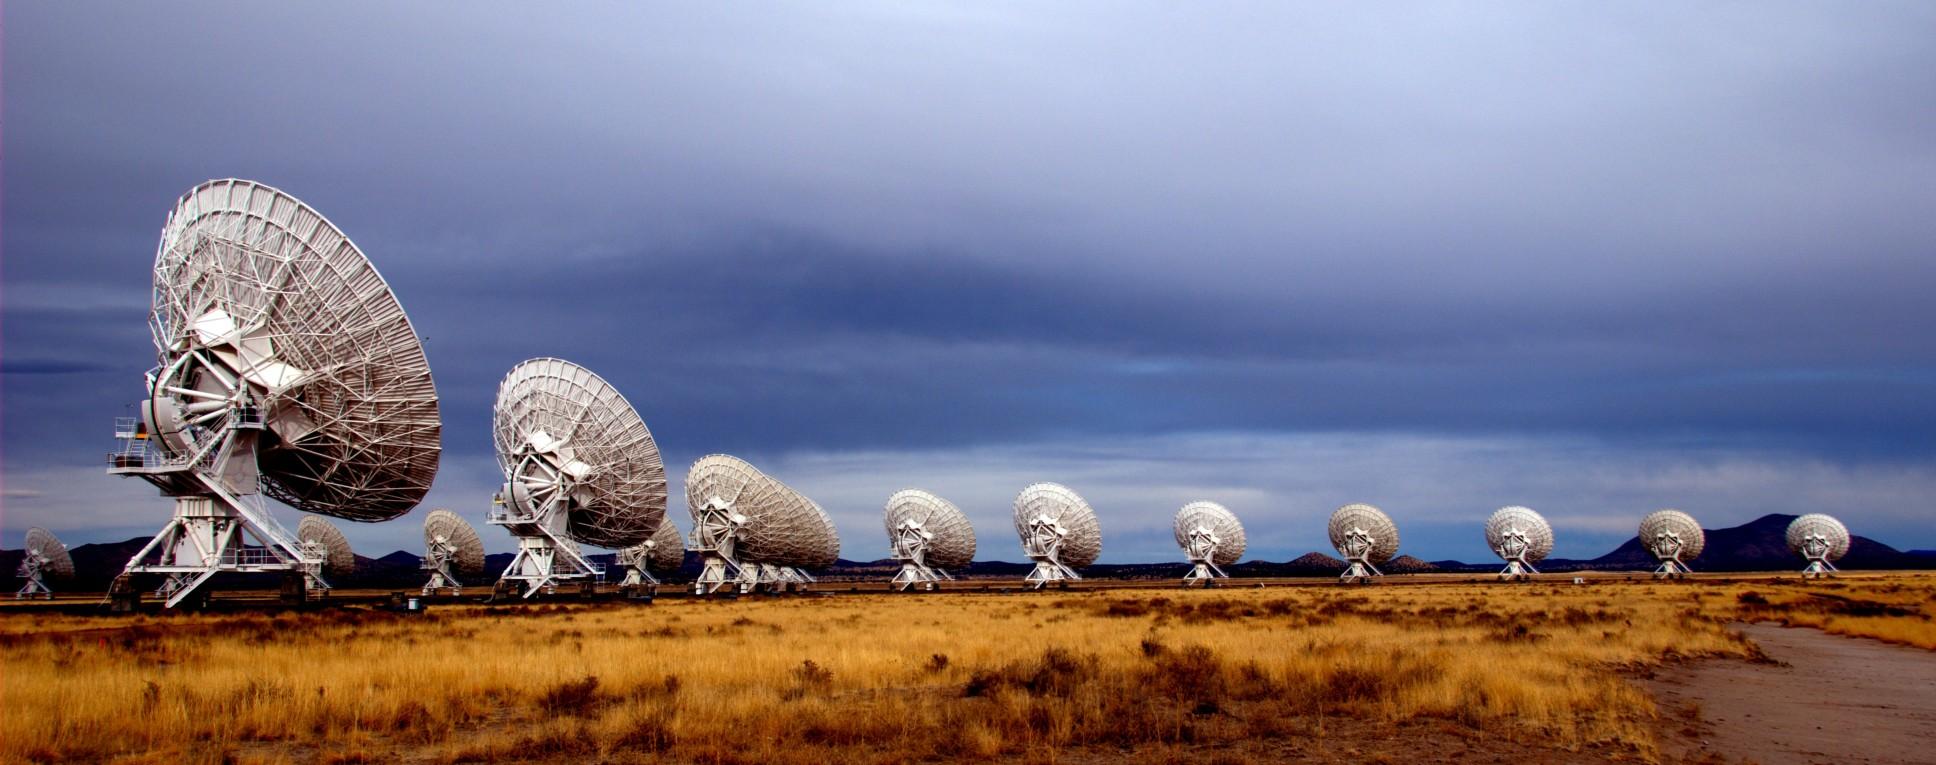 Very Large Array, Truth or Consequences, New Mexico